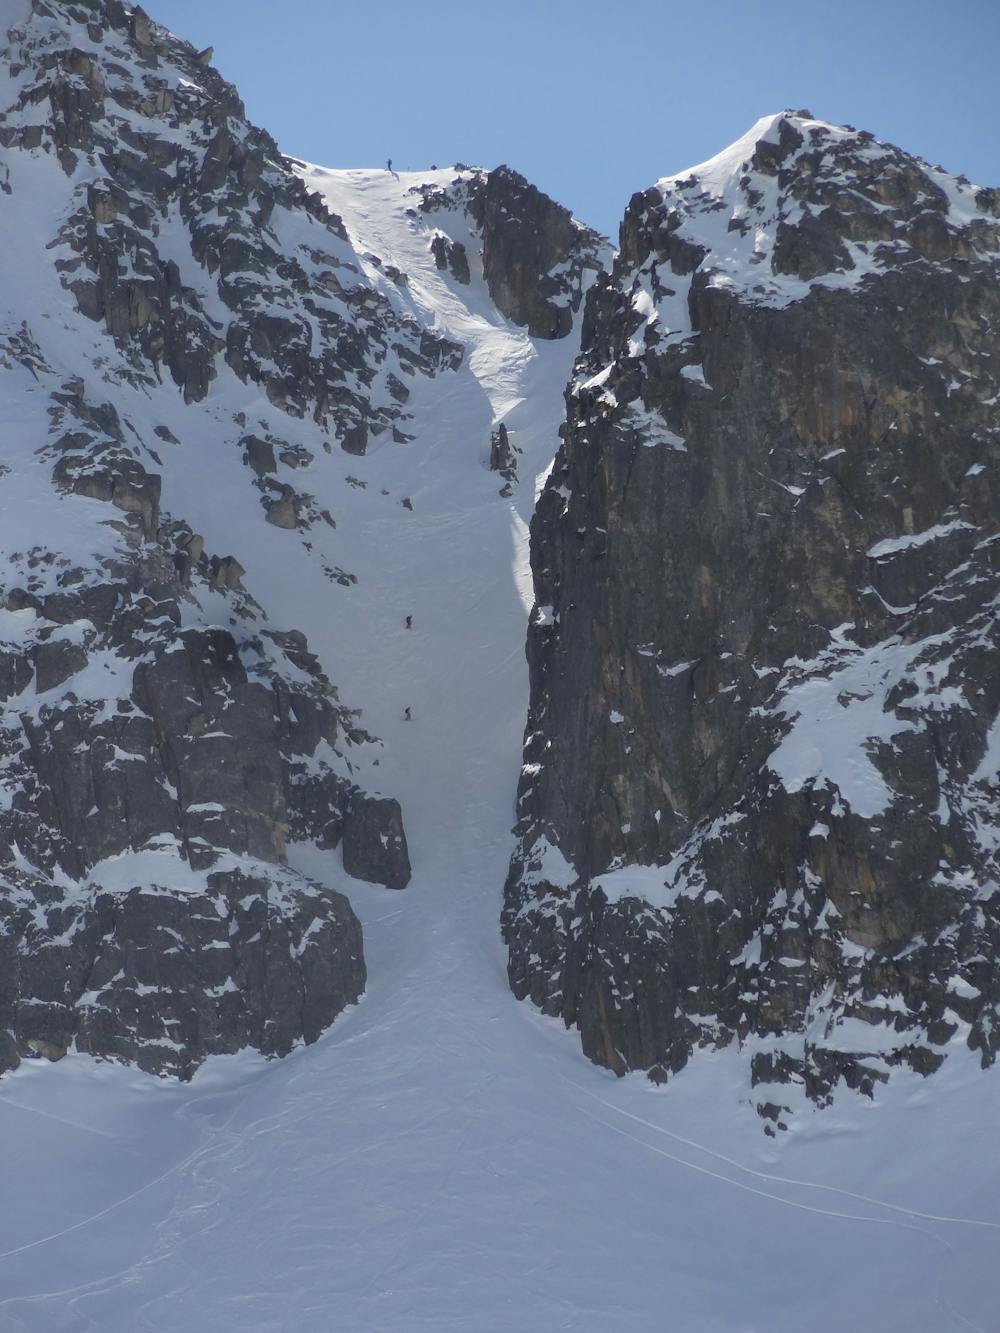 A group of skiers goin down the couloir.